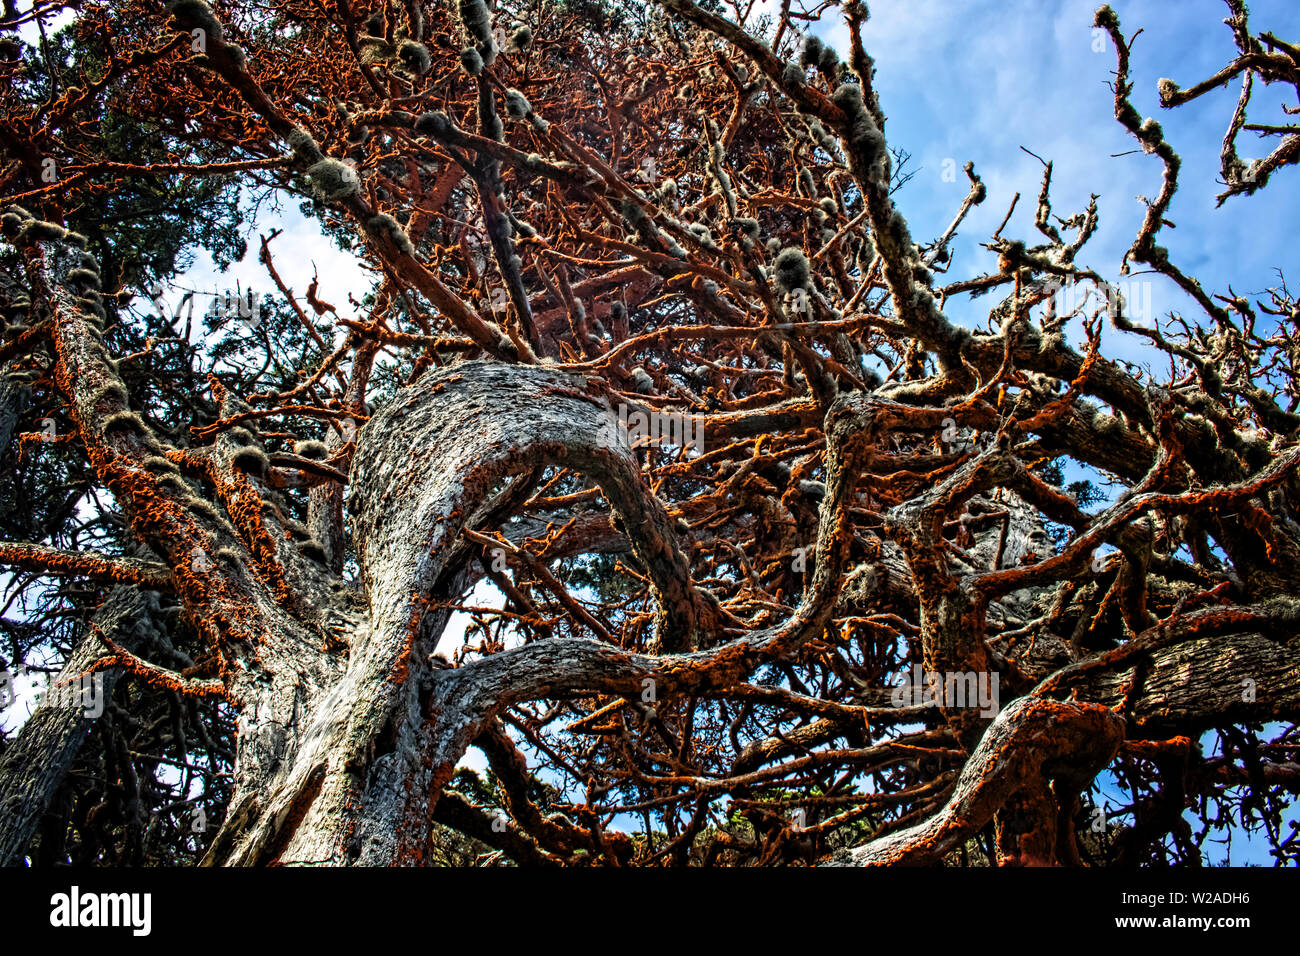 Monterey Cypress Tree twists skyward with white trunk and red limbs in California. Stock Photo